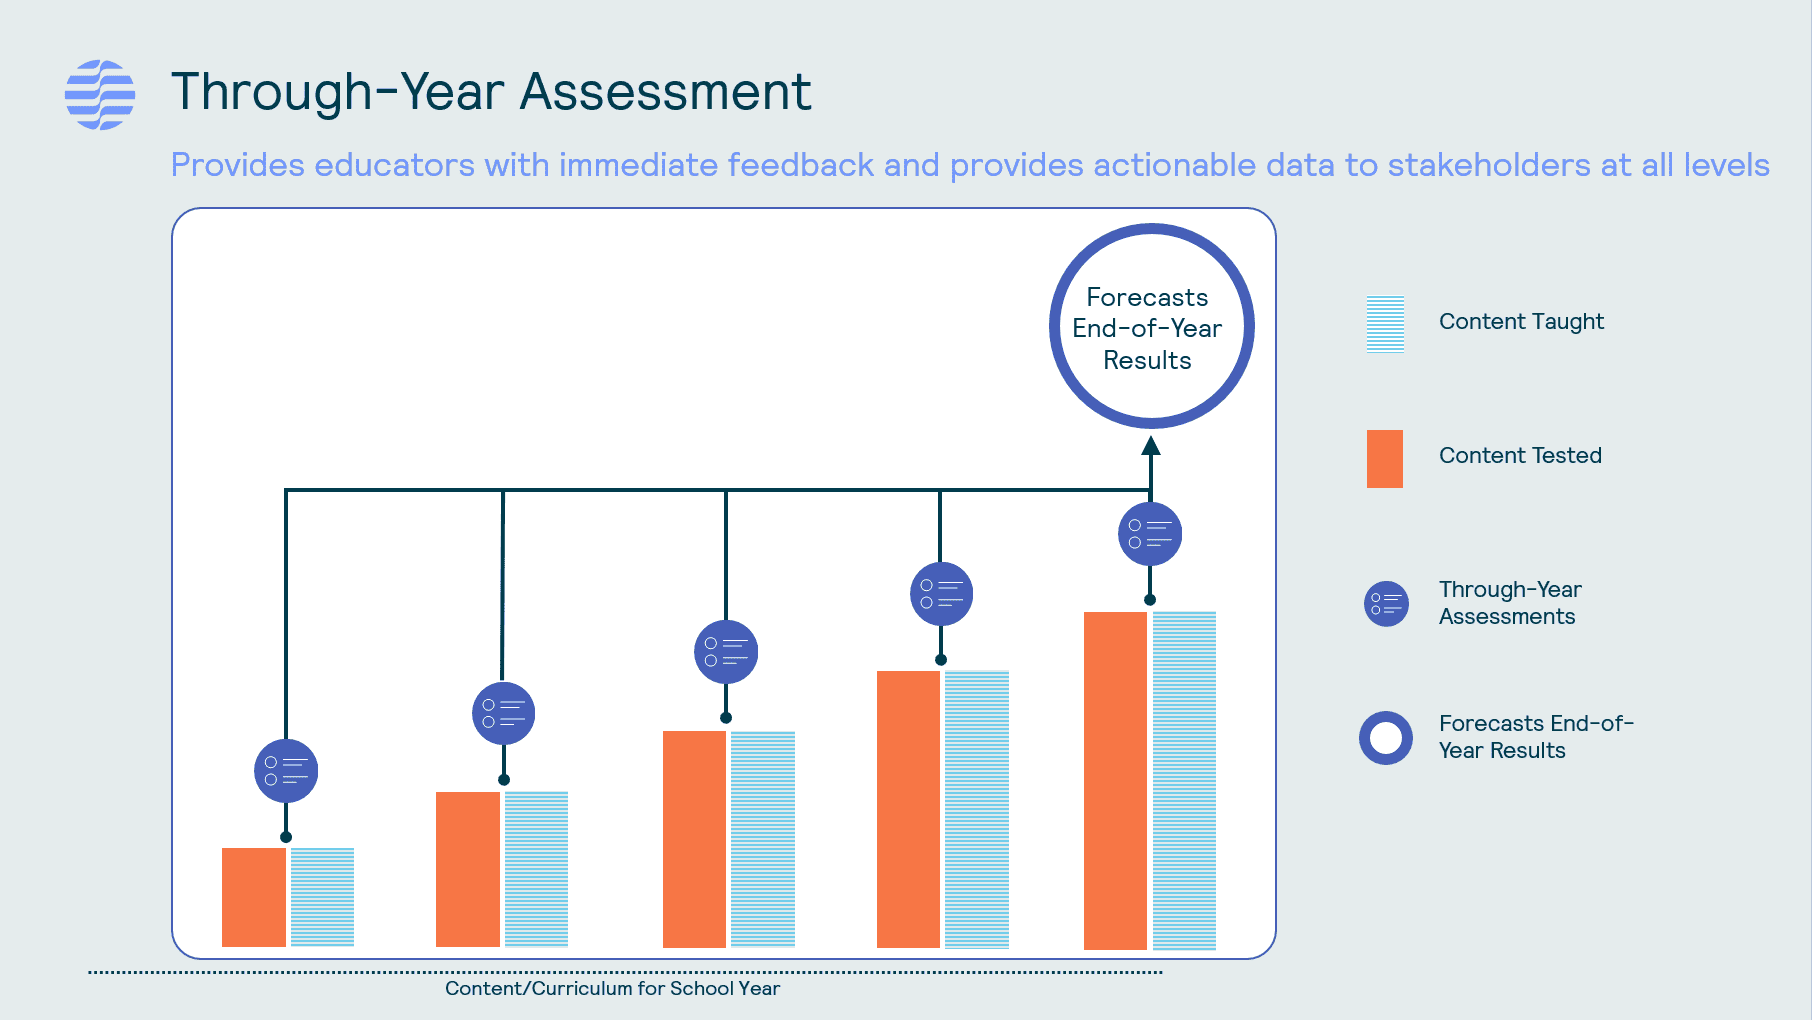 Through-Year Assessment Graphic - Teaching What Is Taught District